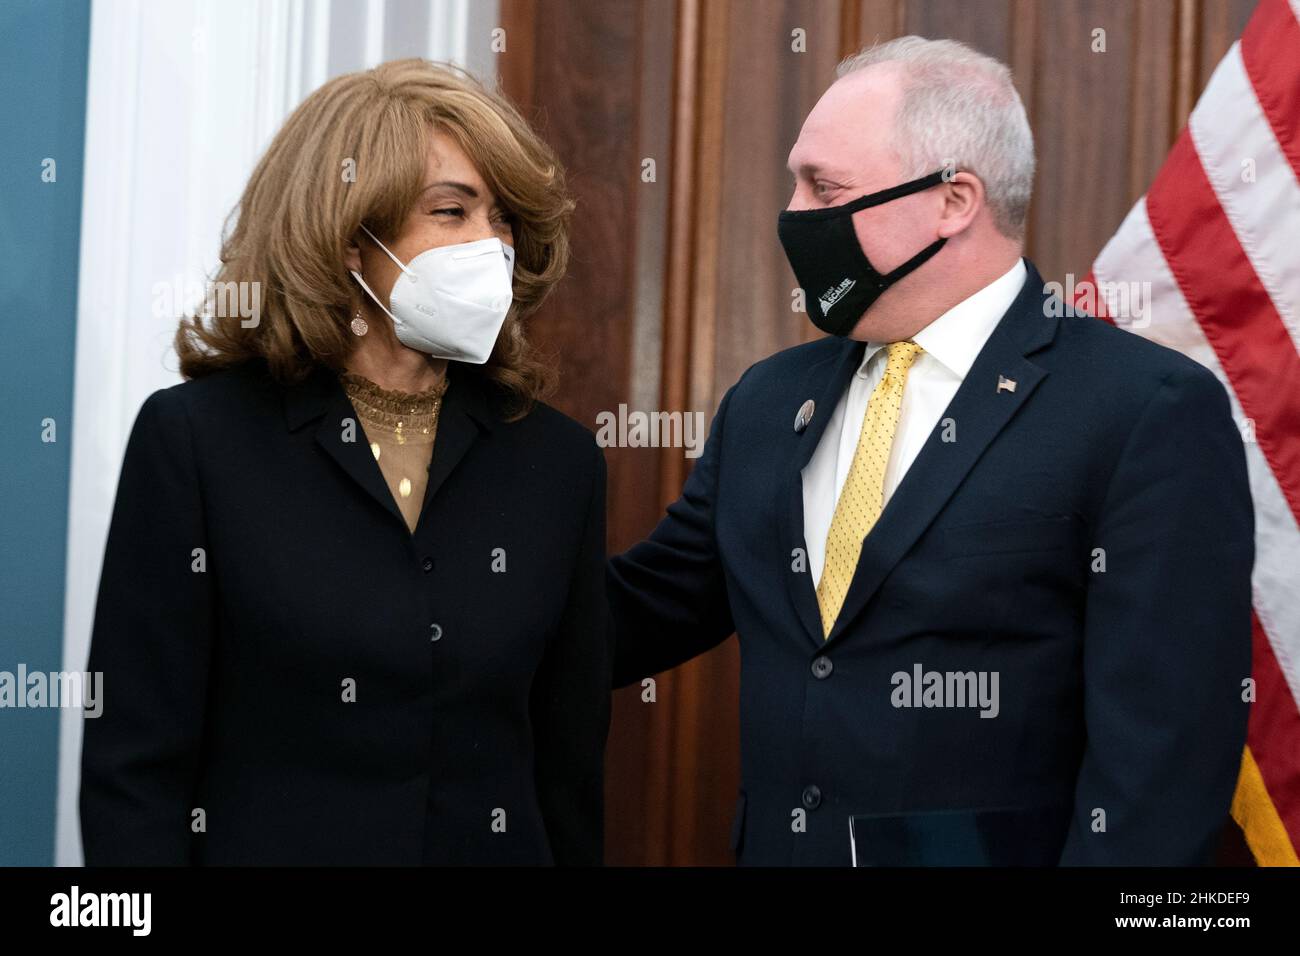 Washington, USA. 03rd Feb, 2022. Great granddaughter Lorna Rainey speaks to House Minority Whip Steve Scalise (R-La.) during a press conference to unveil the Joseph H. Rainey Room in the in the U.S. Capitol in Washington, DC, on Thursday, February 3, 2022. Former Rep. Joseph H. Rainey (R-S.C.) was the first elected Black member of the House of Representatives who served from 1870 to 1879. (Photo by Greg Nash/Pool/Sipa USA) Credit: Sipa USA/Alamy Live News Stock Photo